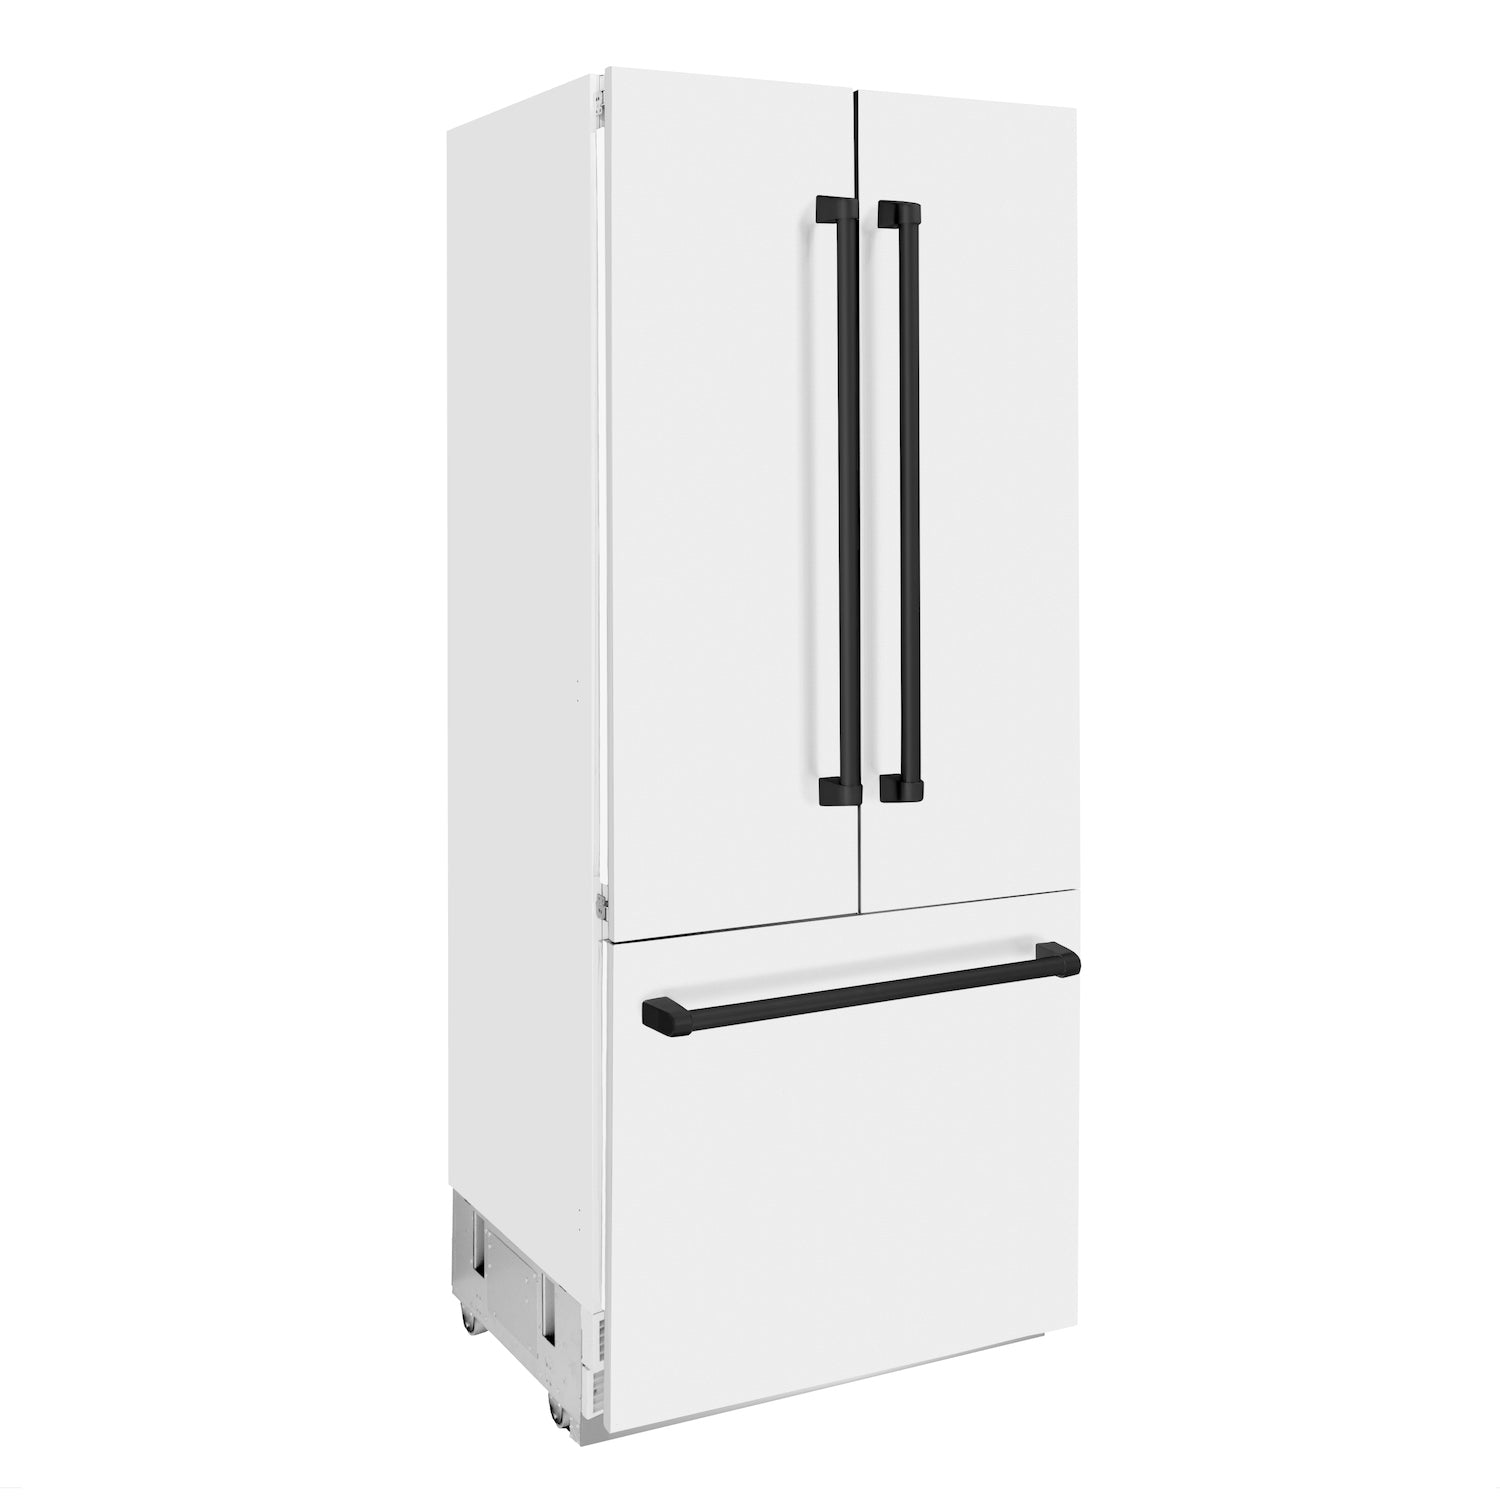 ZLINE Autograph Edition 36 in. 19.6 cu. ft. Built-in 2-Door Bottom Freezer Refrigerator with Internal Water and Ice Dispenser in White Matte with Matte Black Accents (RBIVZ-WM-36-MB) side, closed.